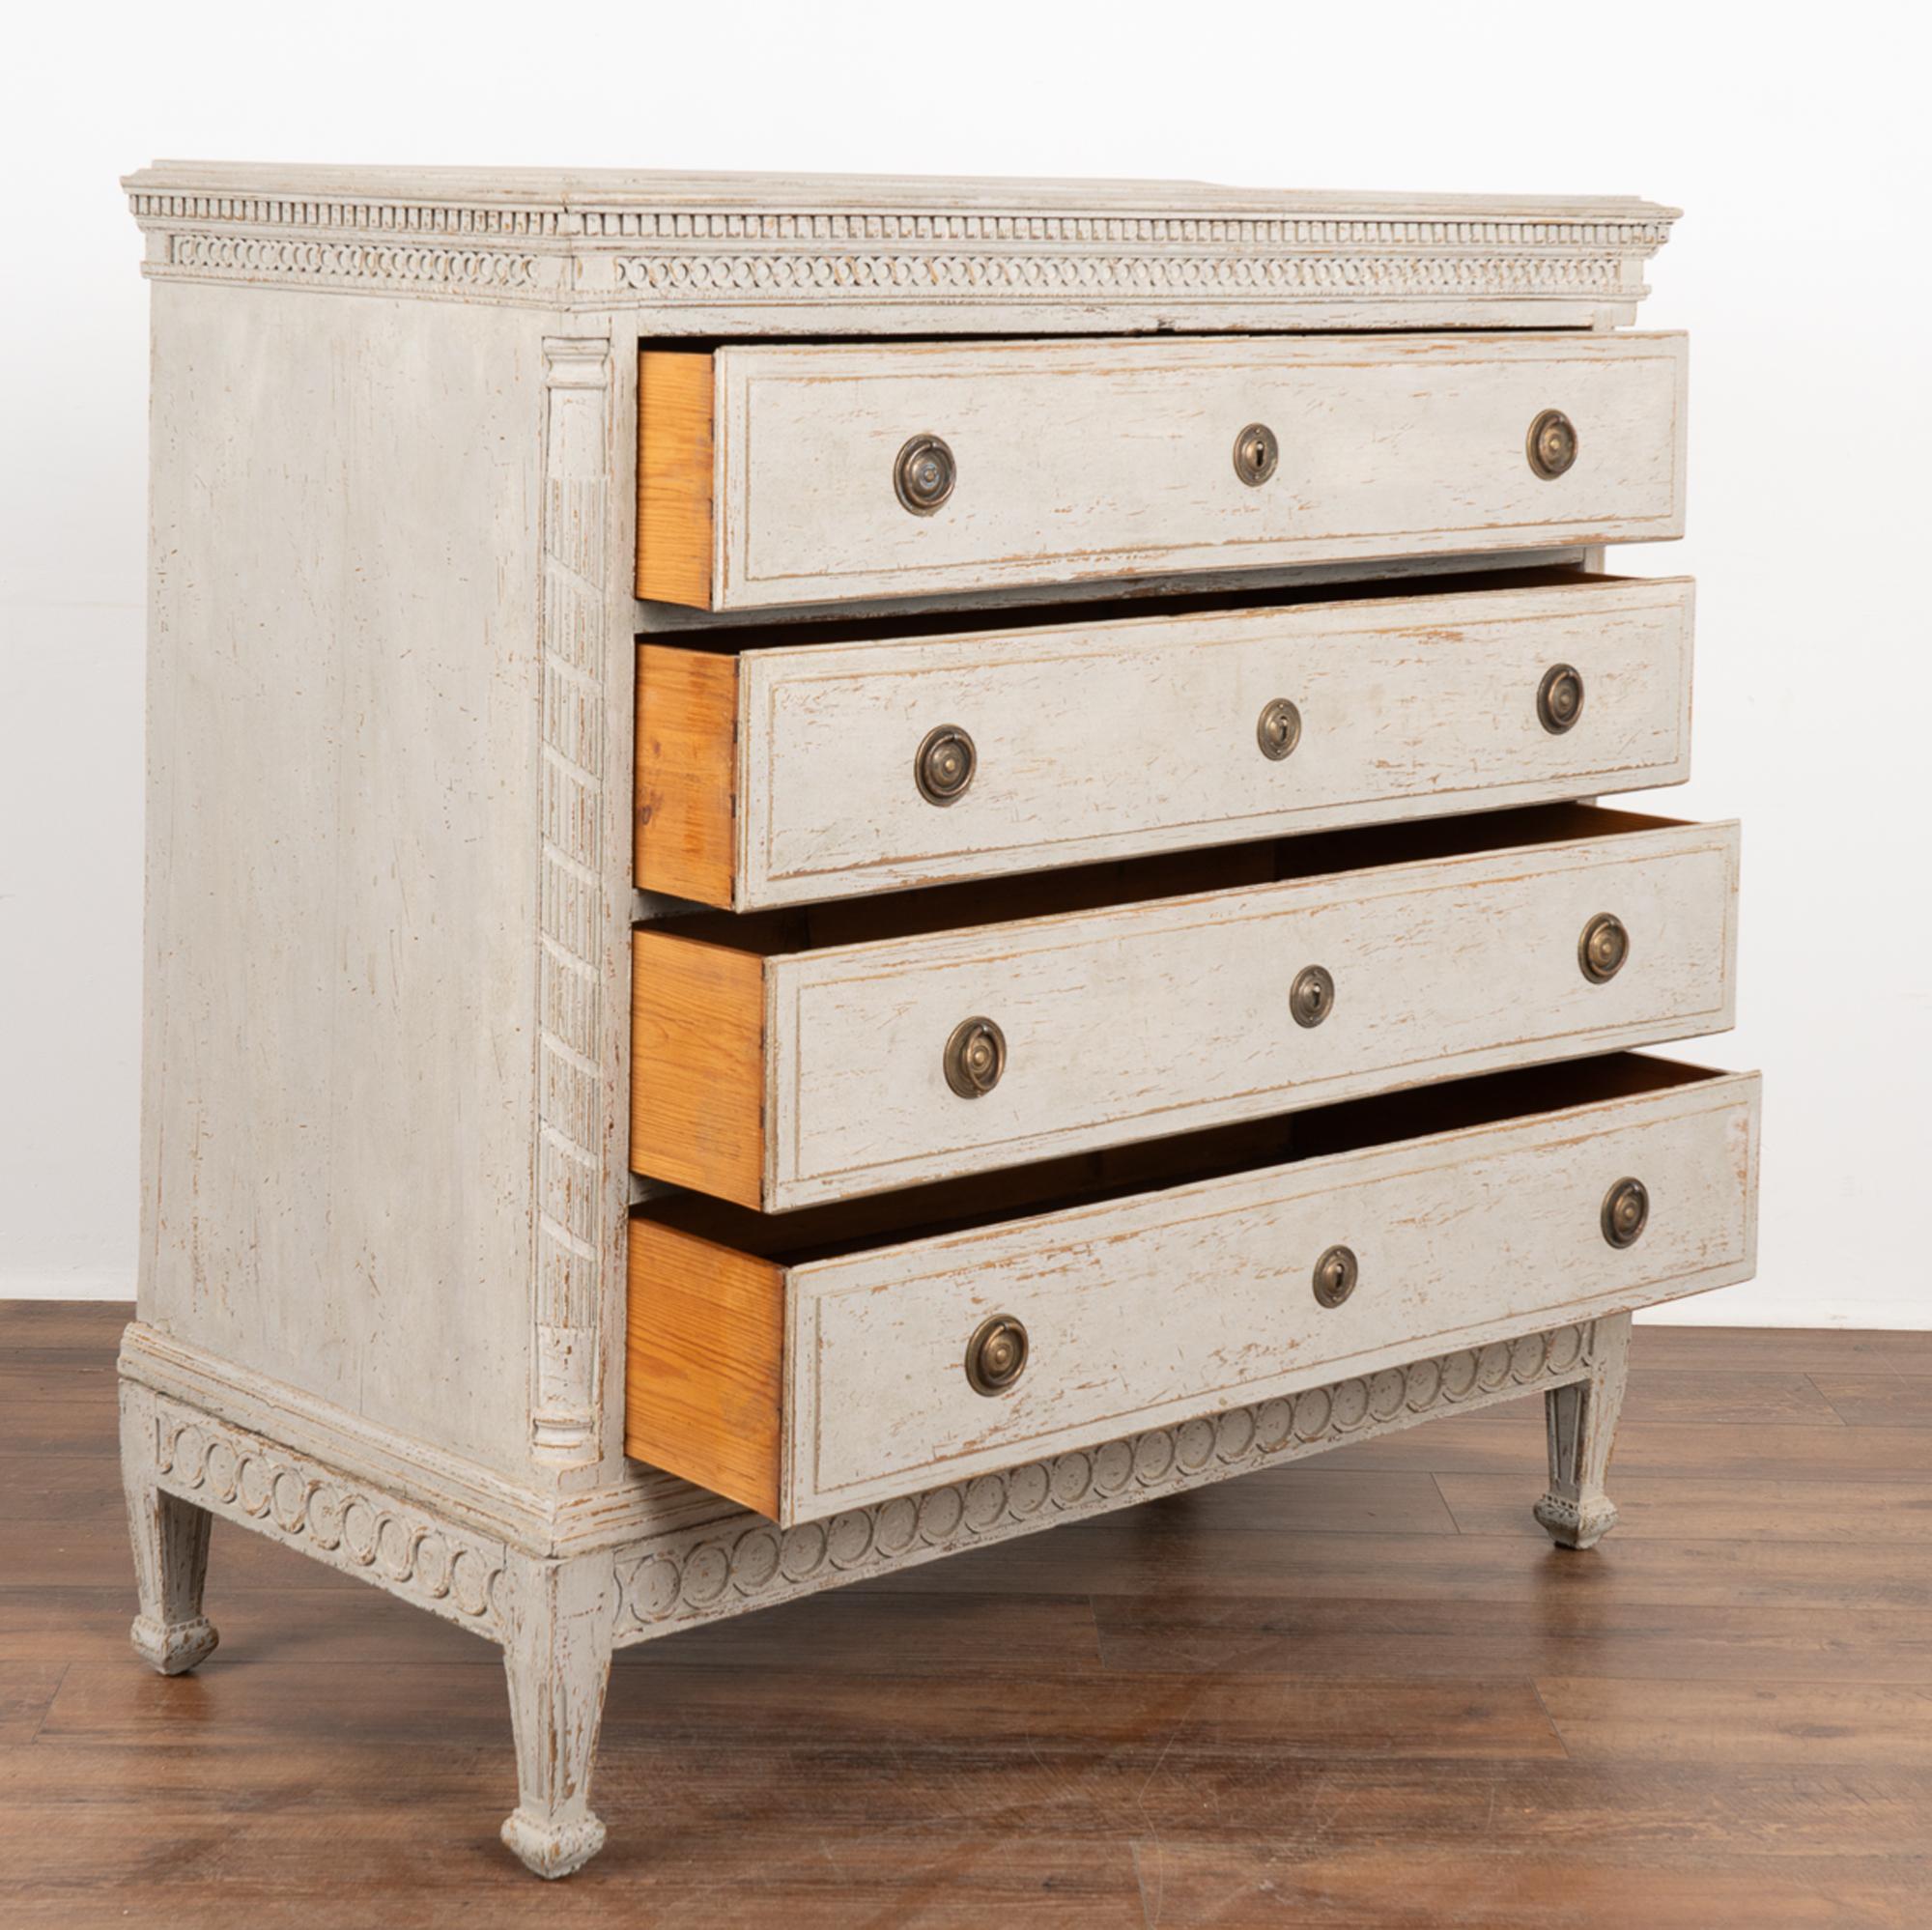 Danish Large Gray Chest of Four Drawers, Denmark circa 1780-1800